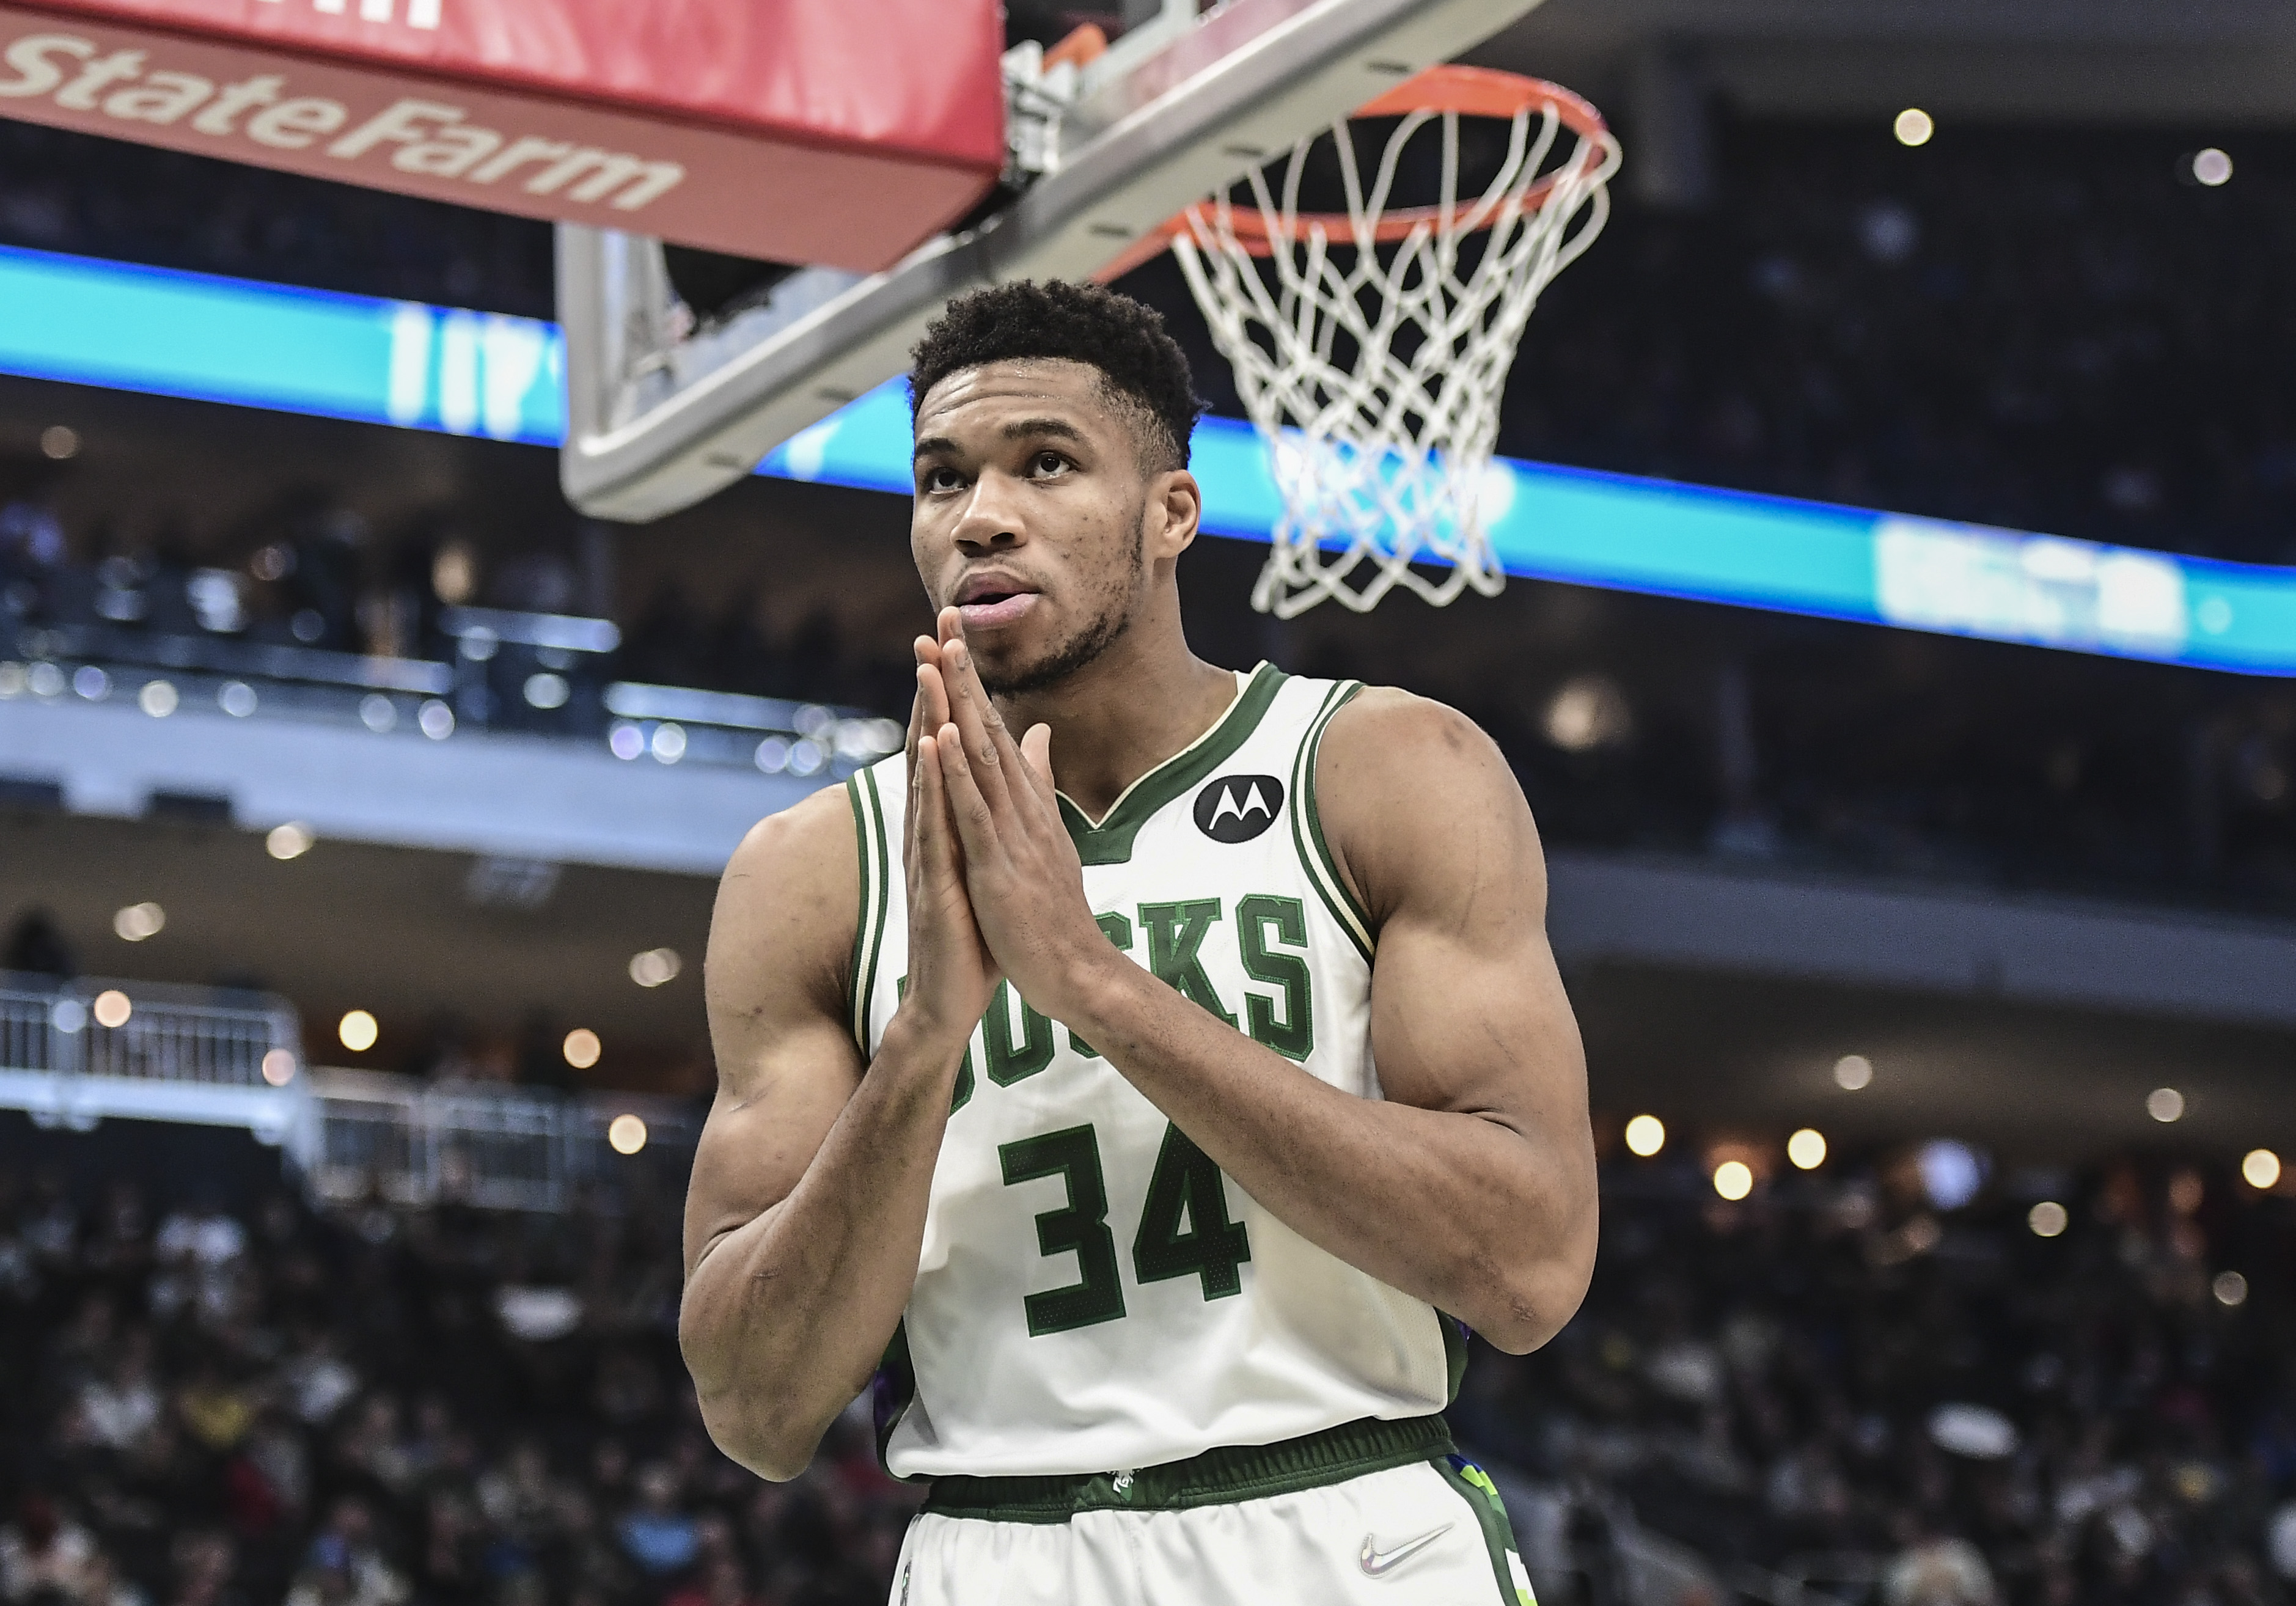 Dec 1, 2021; Milwaukee, Wisconsin, USA;  Milwaukee Bucks forward Giannis Antetokounmpo (34) gets ready before the game against the Charlotte Hornets at Fiserv Forum. Mandatory Credit: Benny Sieu-USA TODAY Sports